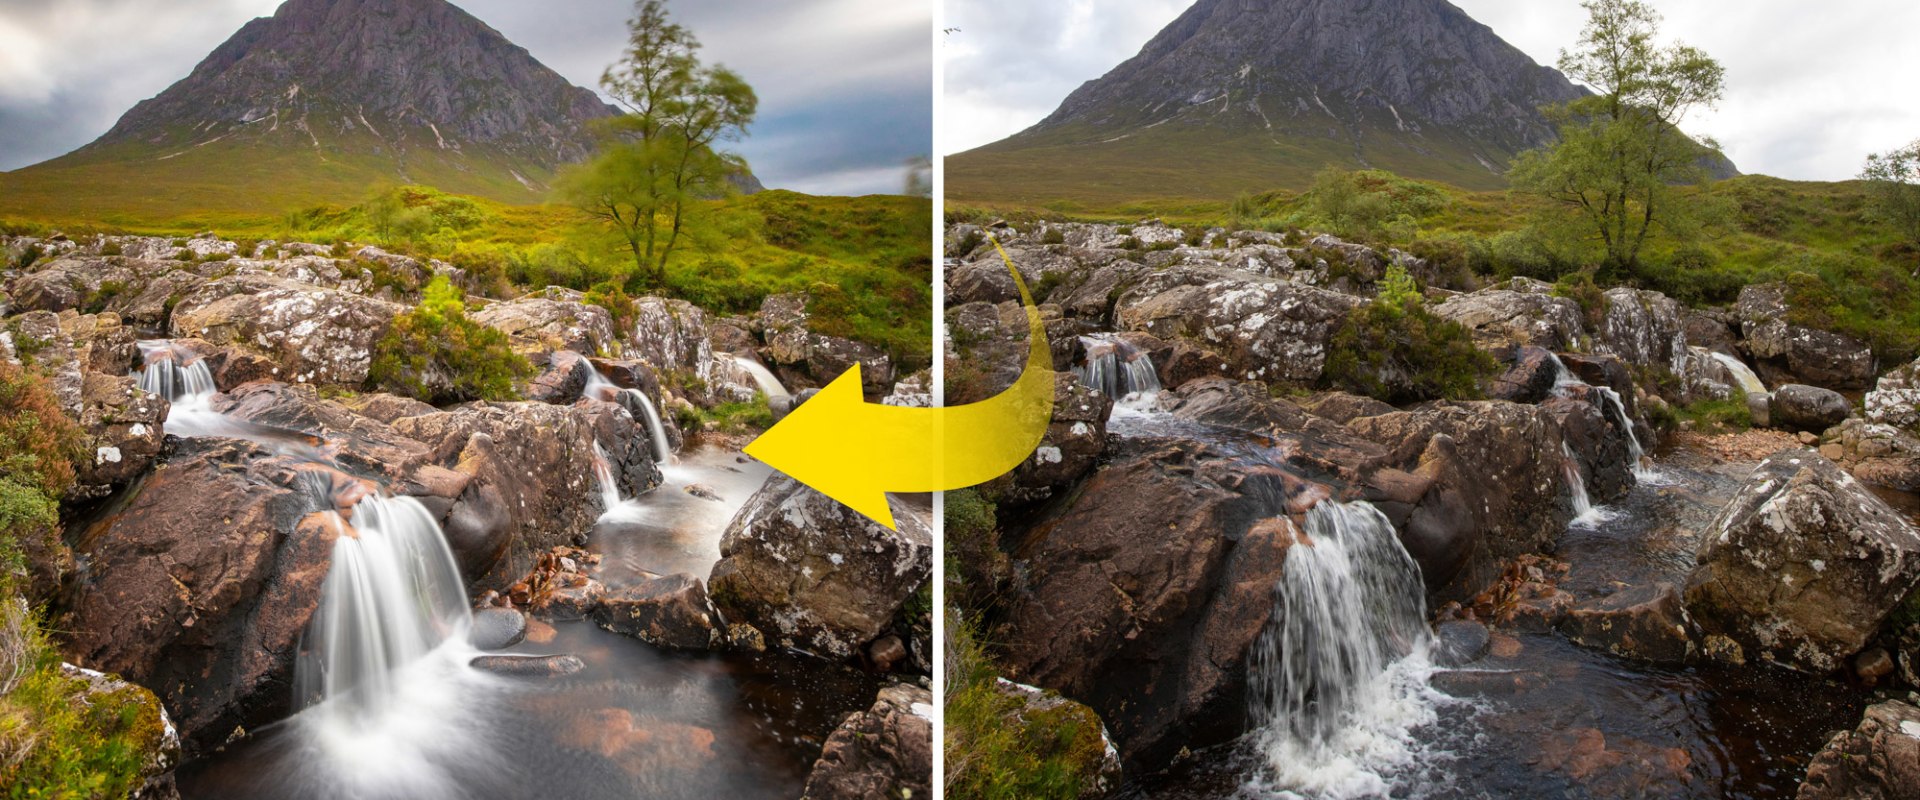 Filters for Landscape Photography: Capturing the Perfect Shot